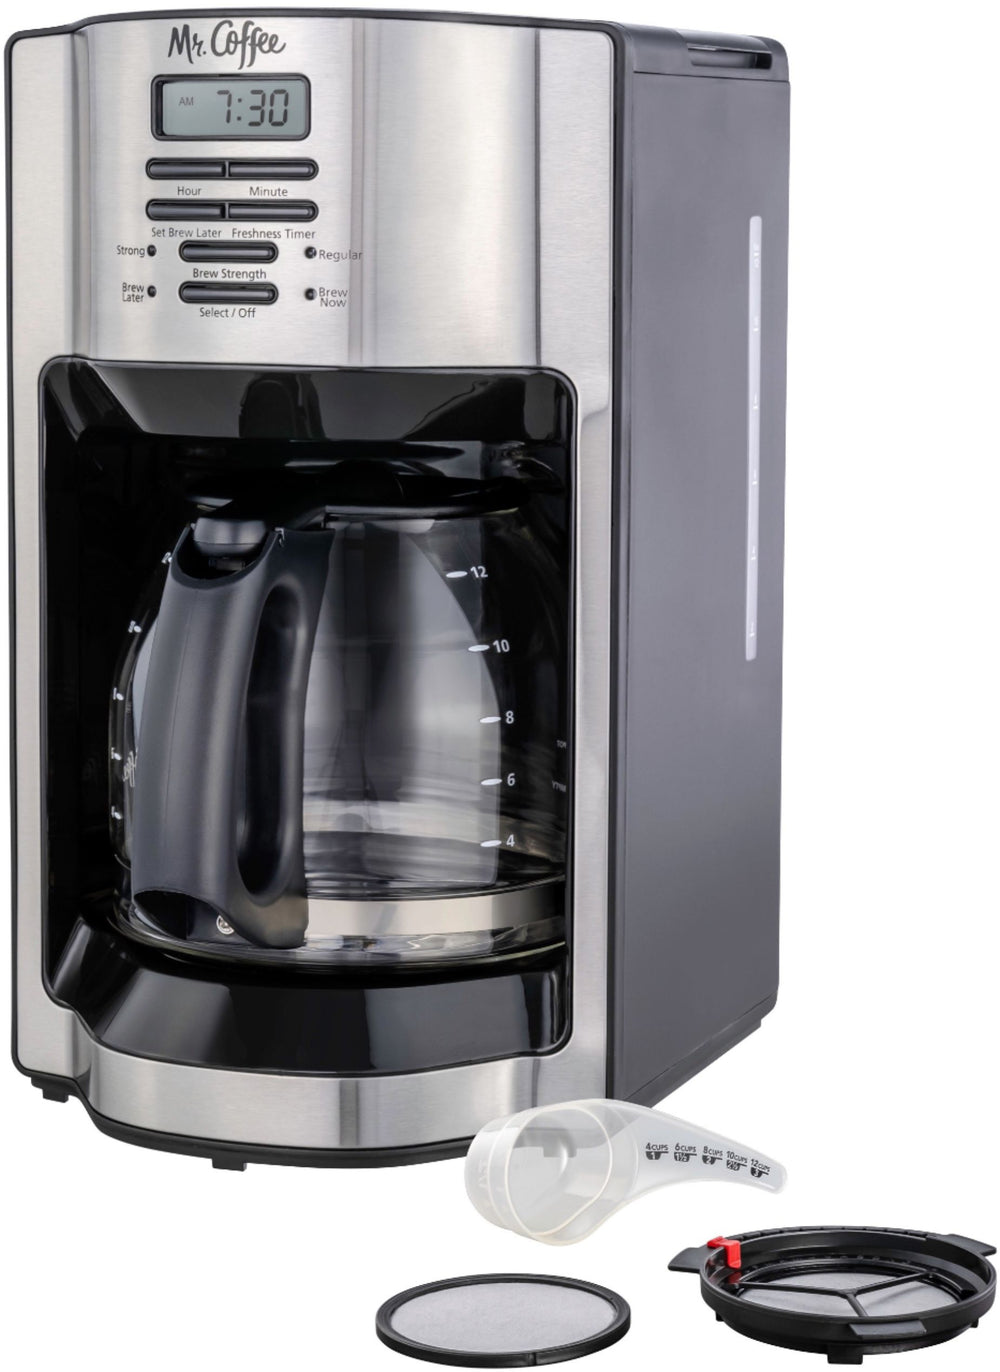 Mr. Coffee - 12-Cup Coffee Maker with Rapid Brew System - Stainless Steel_1